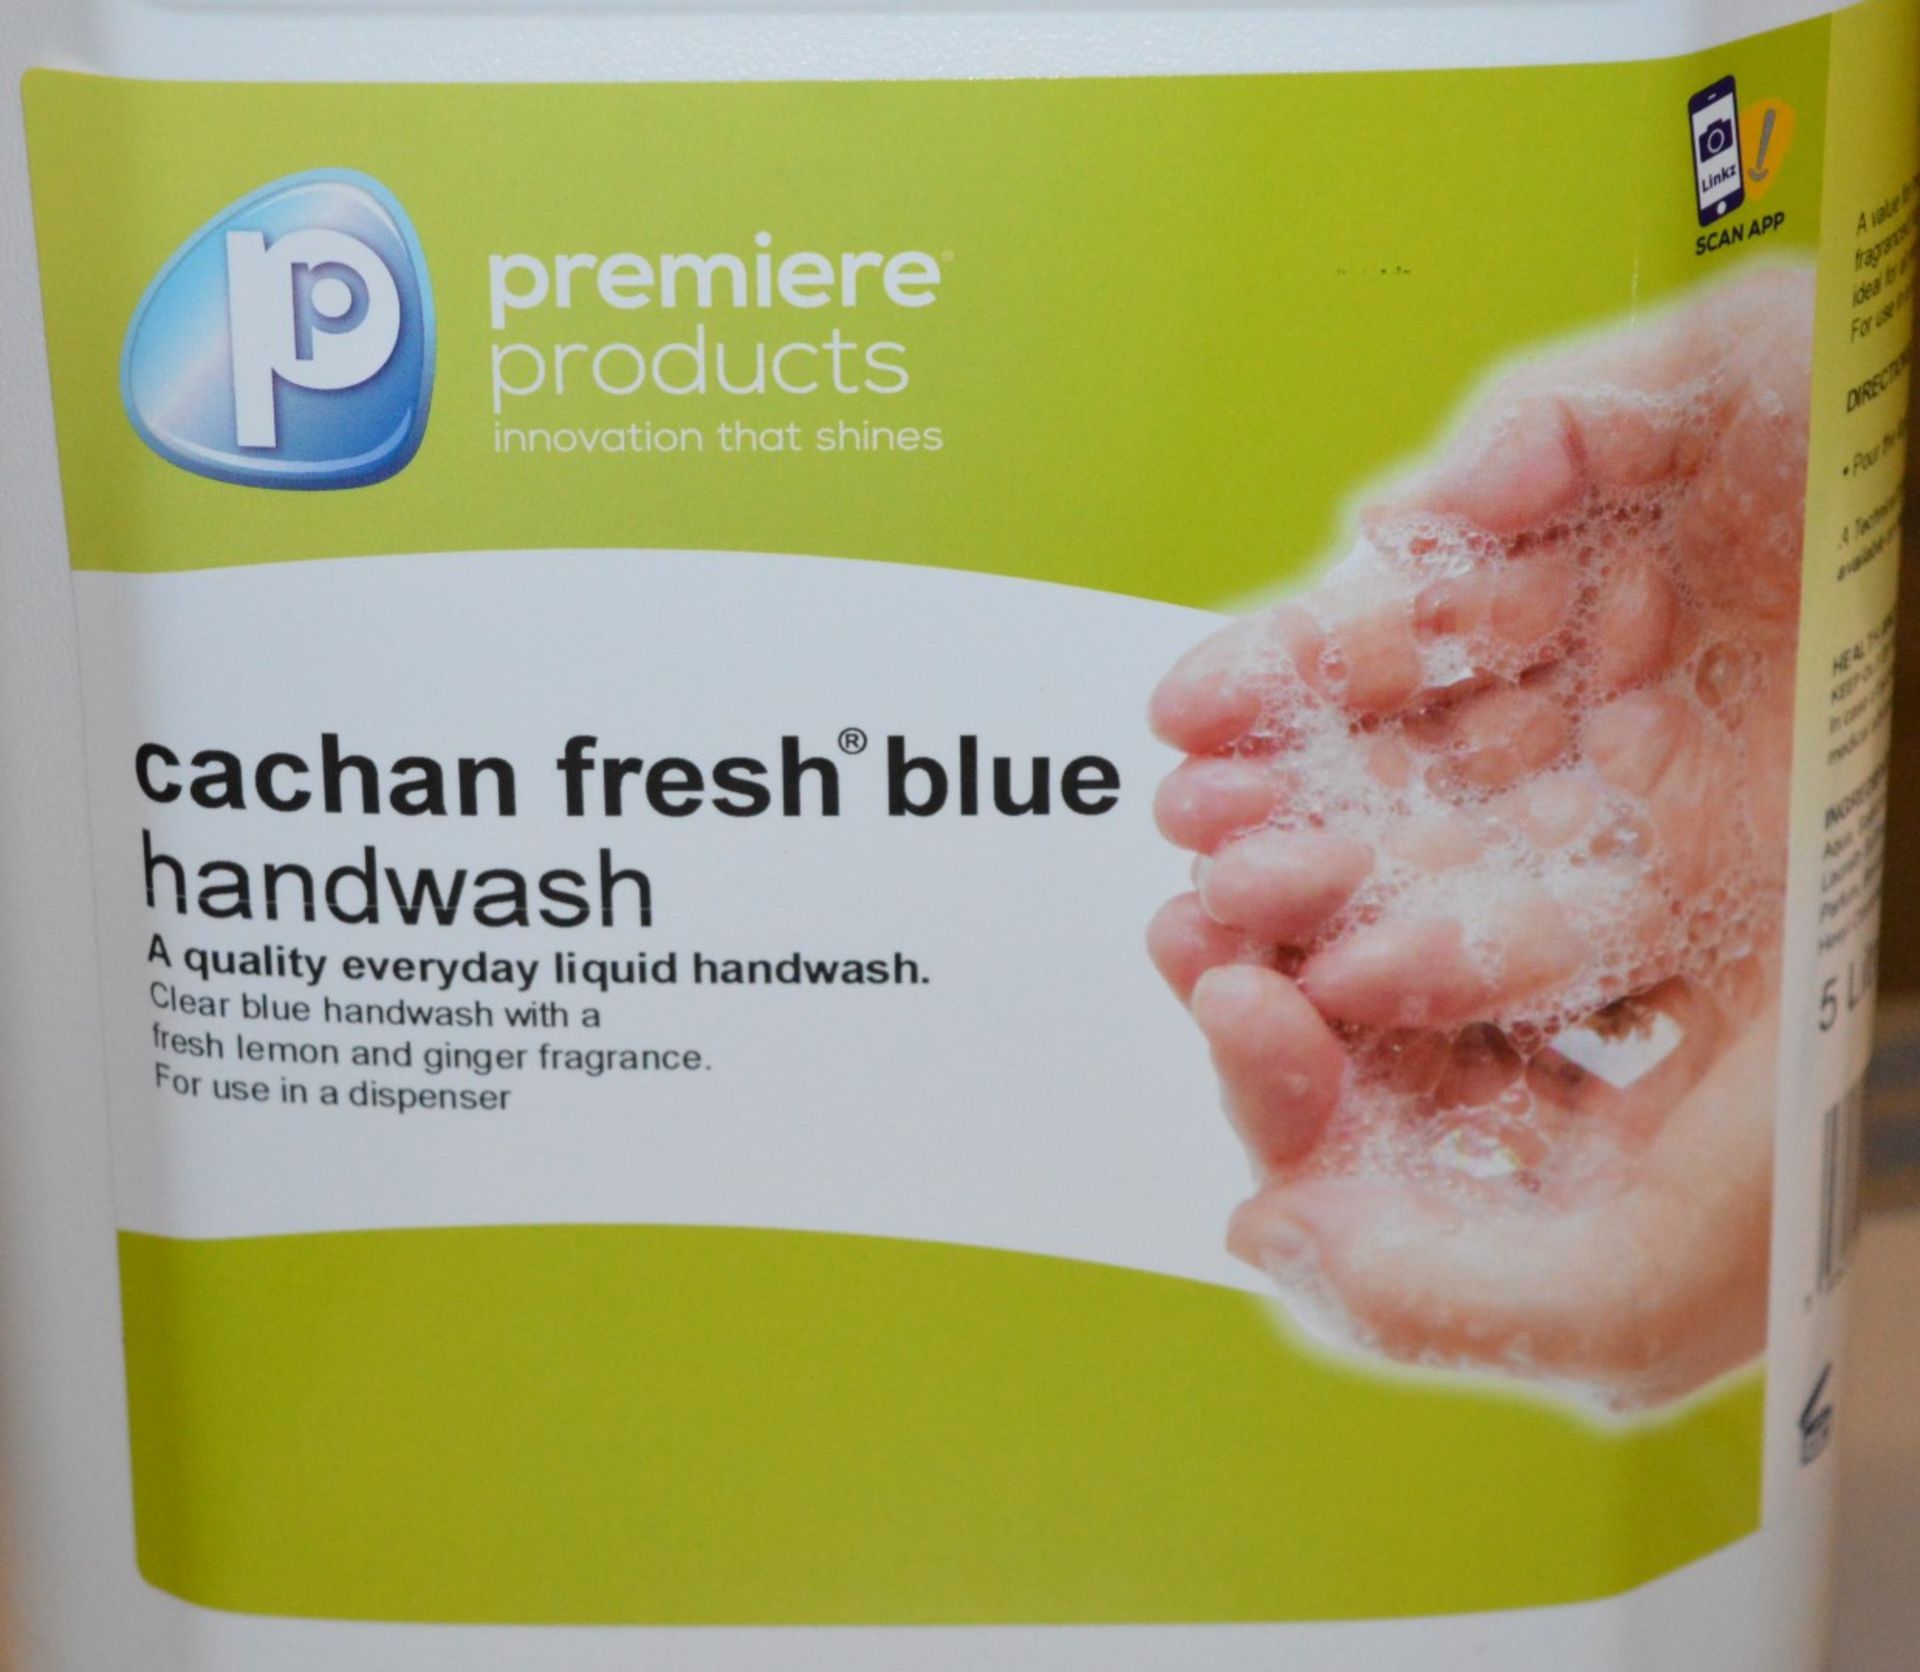 10 x Cachan Fresh 5 Litre Everyday Hand Wash - Premiere Products - Qulaity Everyday Hand Wash - - Image 2 of 2